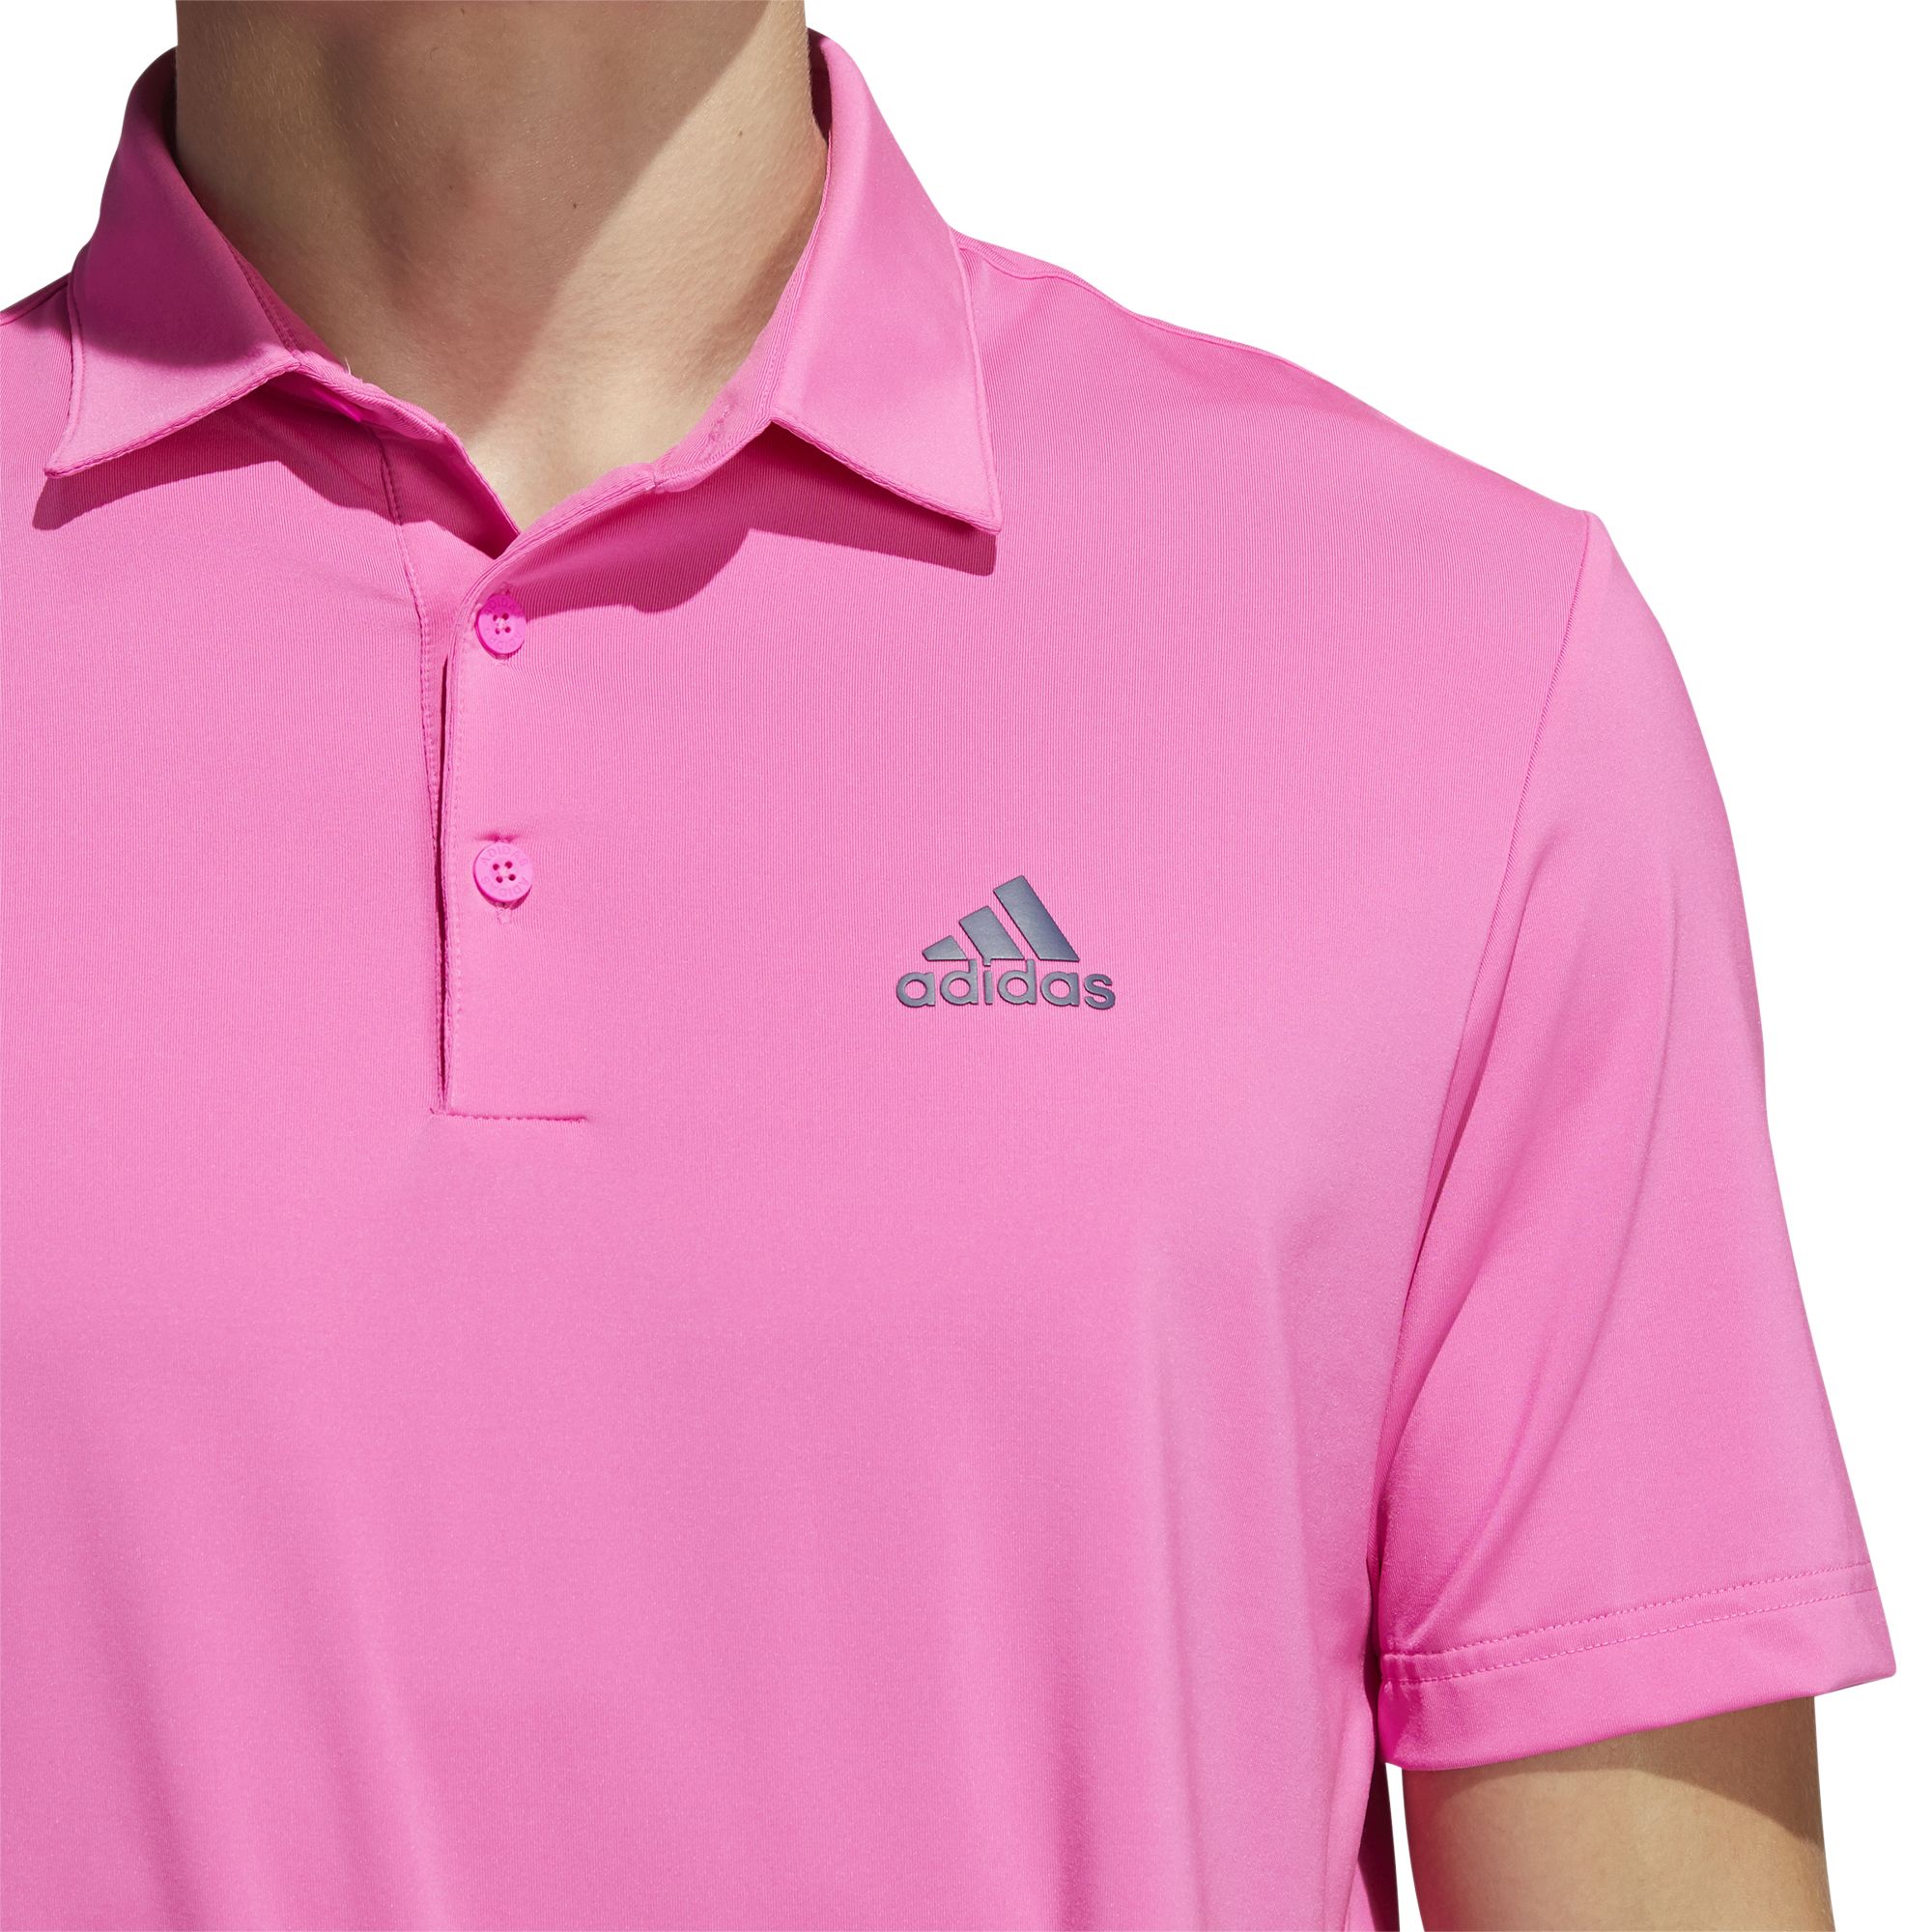 adidas Ultimate 365 Solid Golf Polo Shirt Screaming Pink | Scottsdale Golf